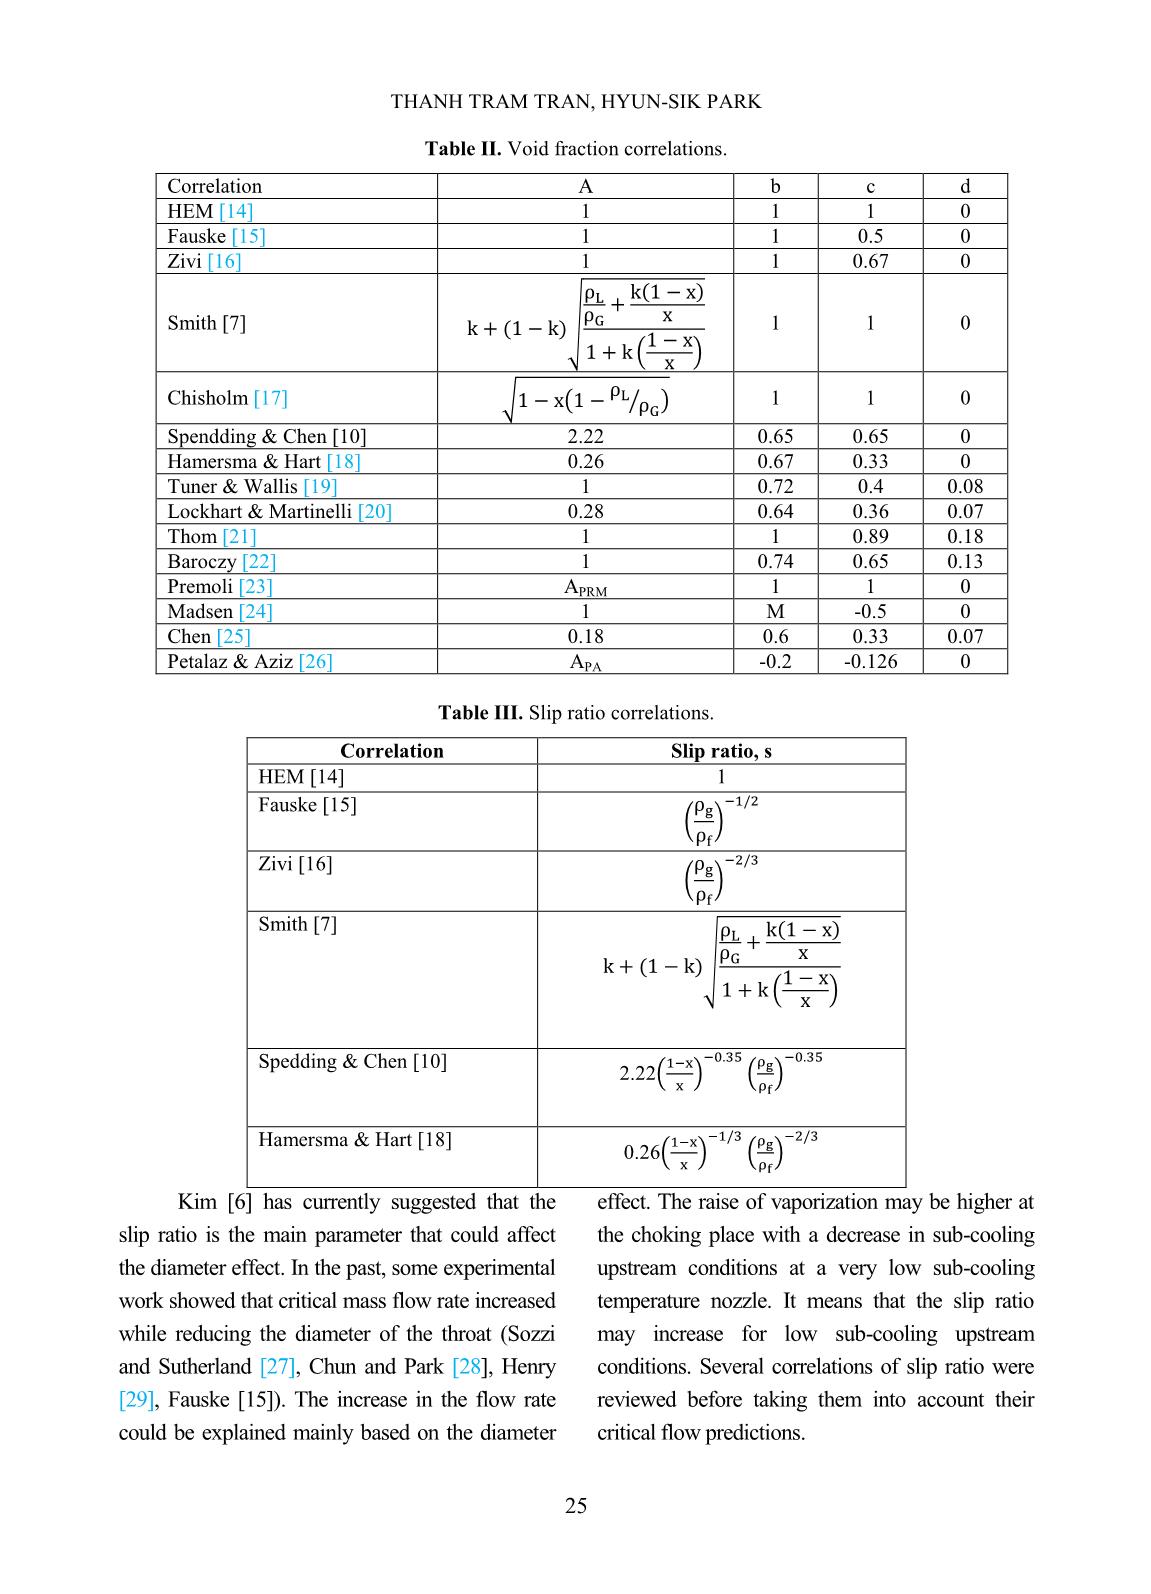 Evaluation of slip ratio correlations in two-phase flow trang 5